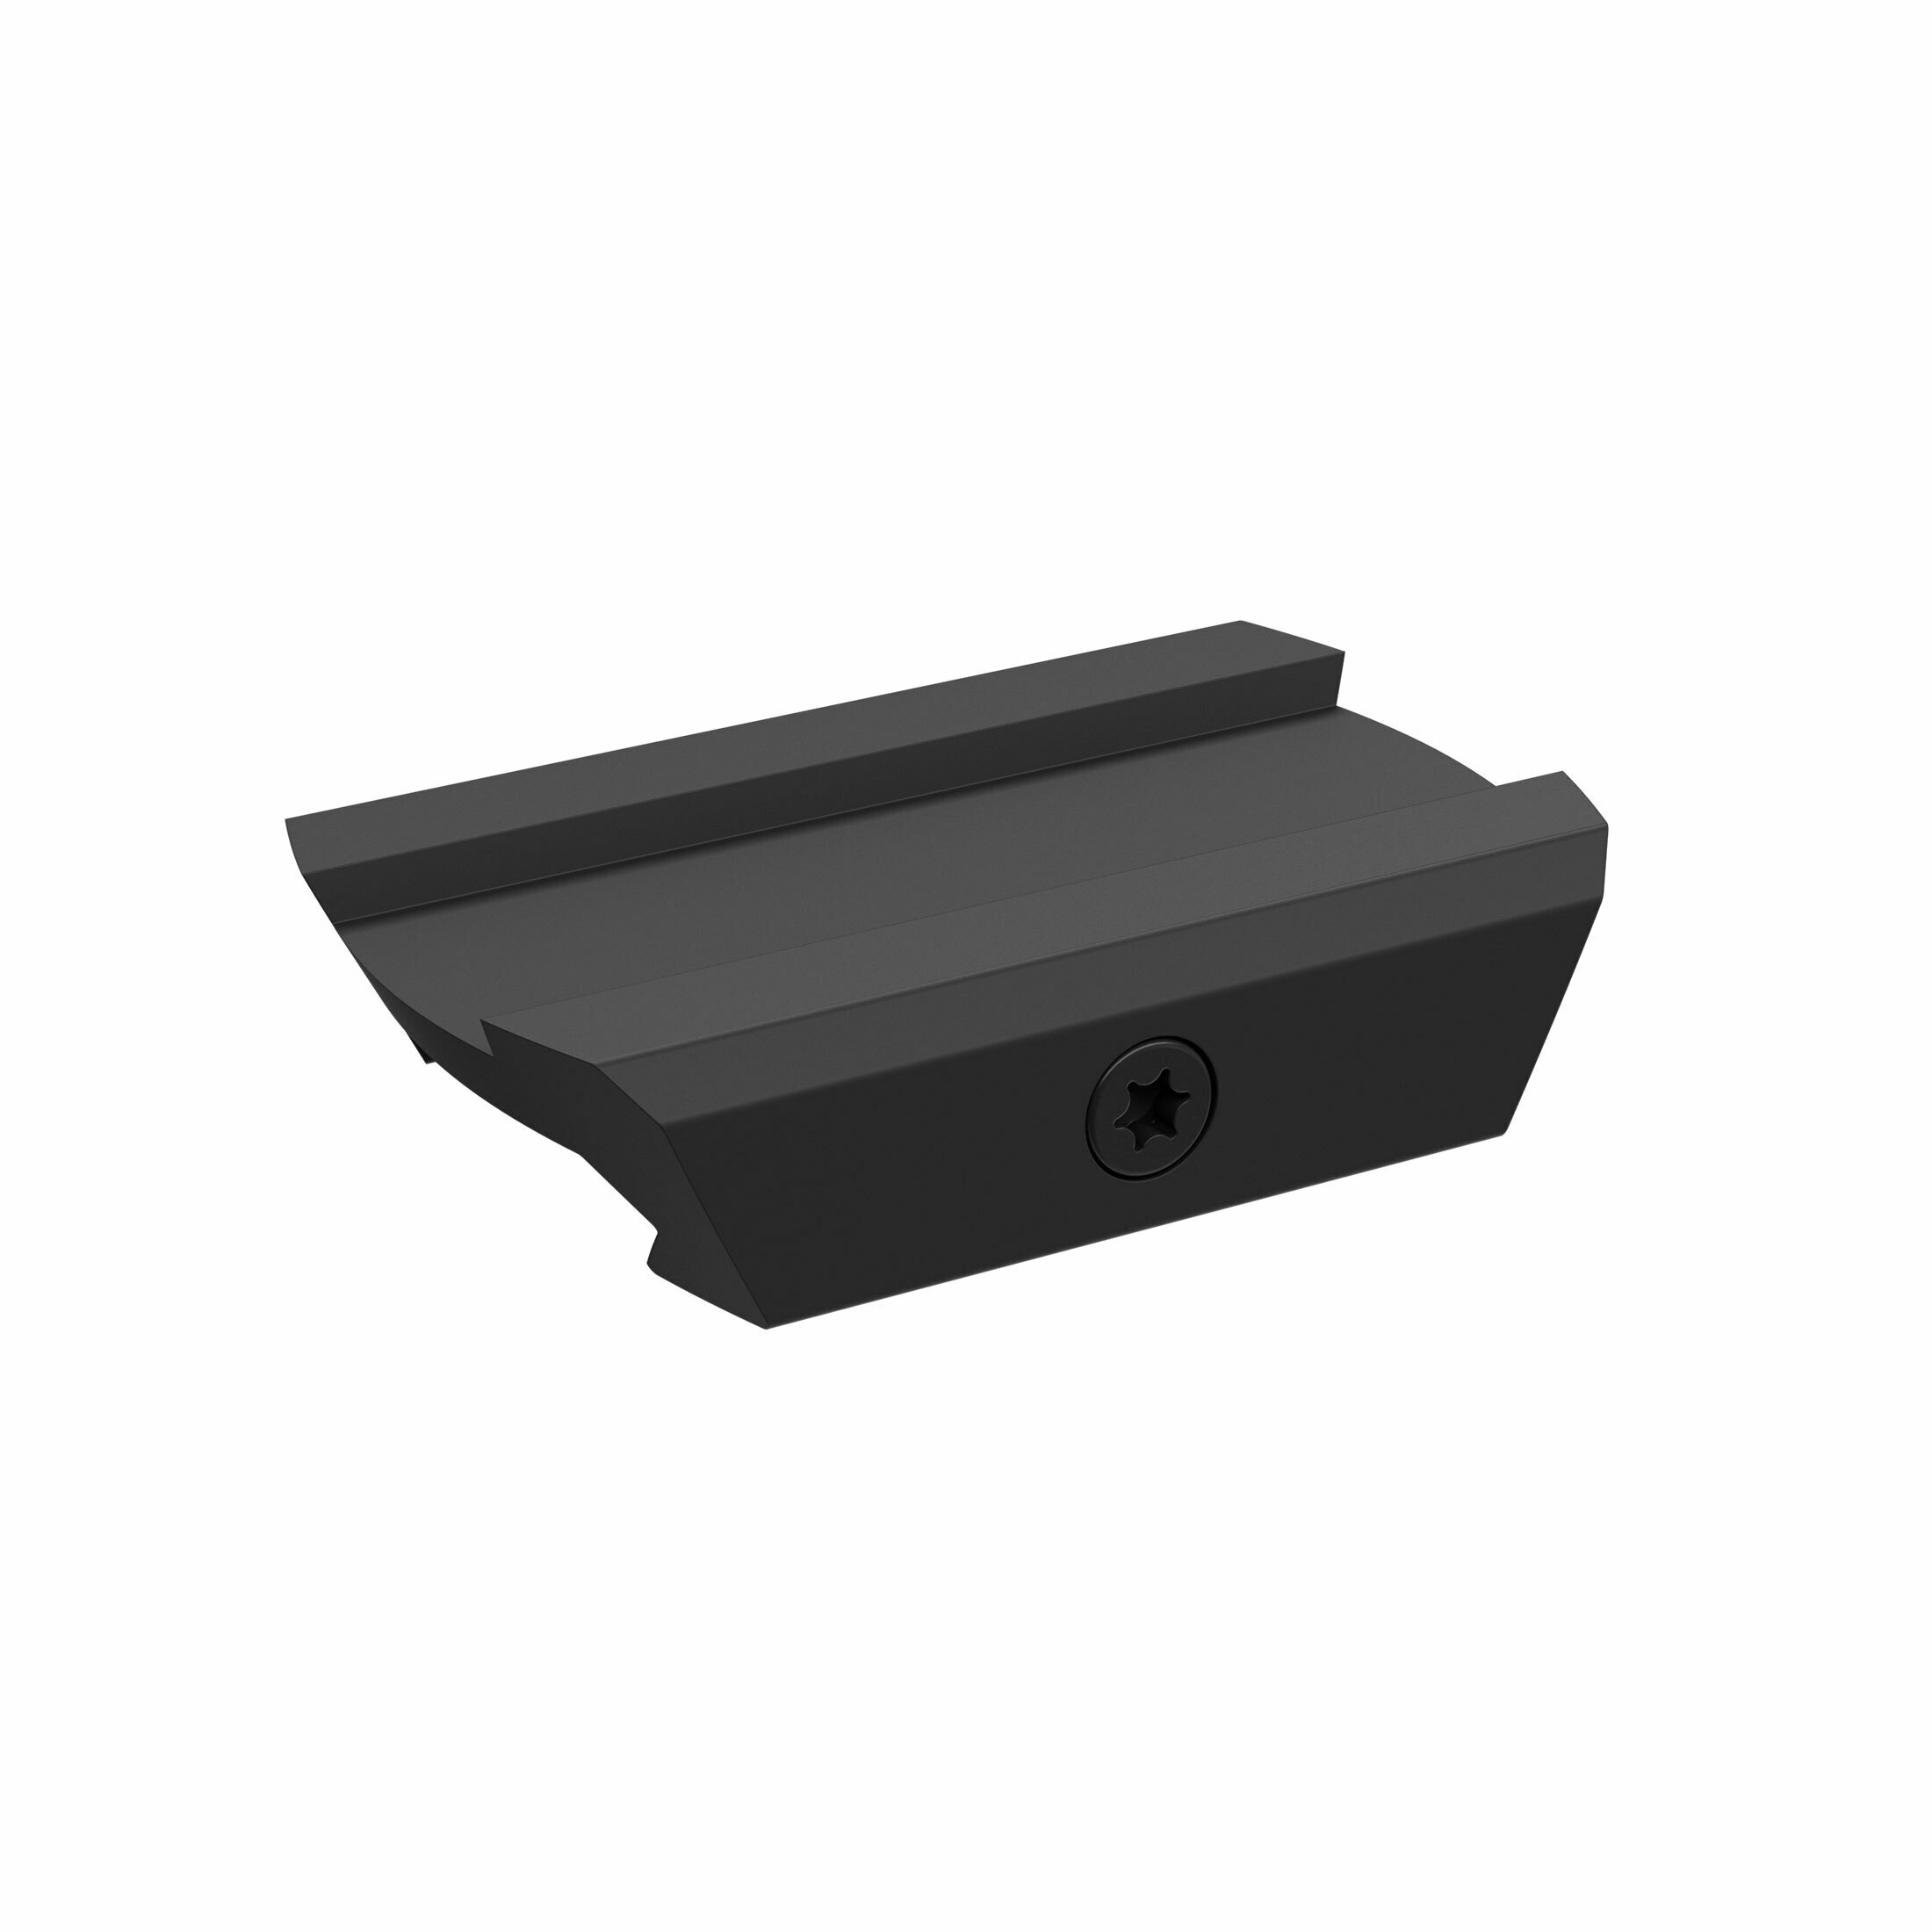 Holosun low mount HS-MOUNT-LOW, accessory for Holosun red dot sights